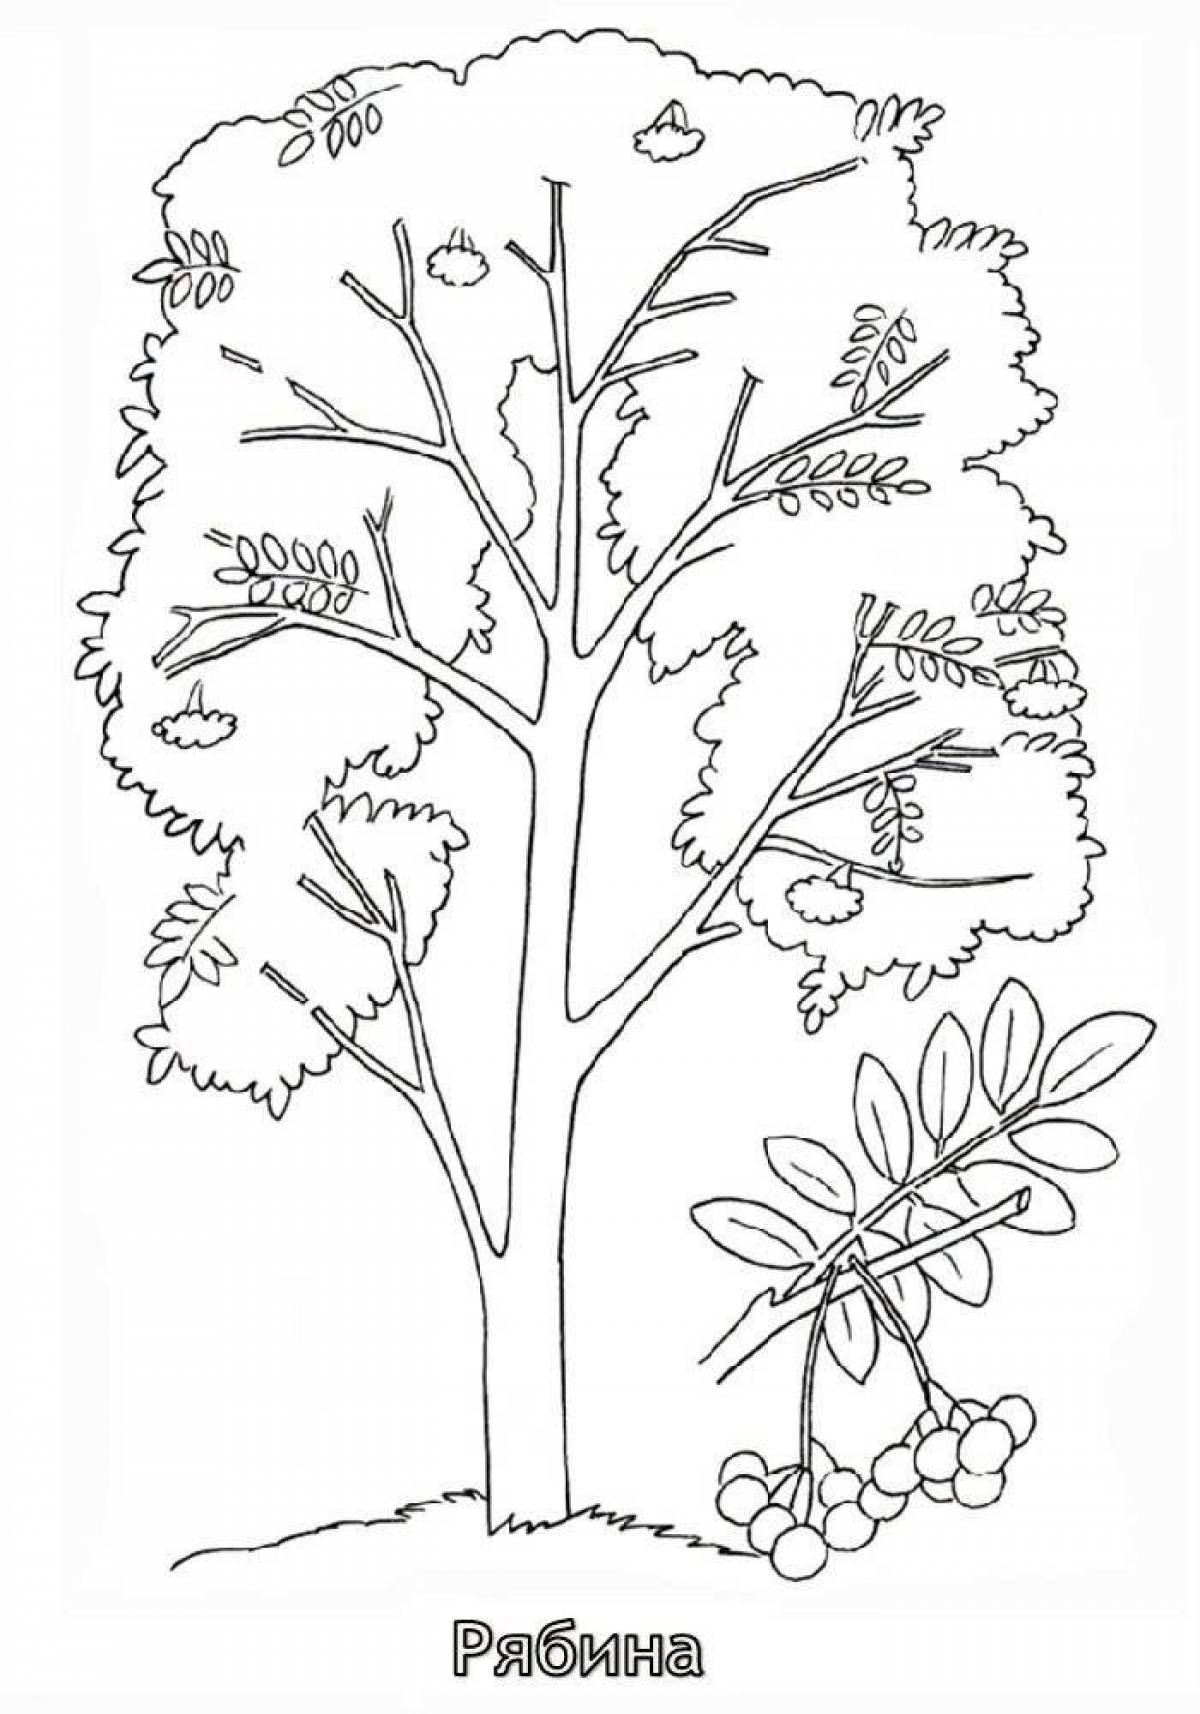 Exciting tree coloring for kids